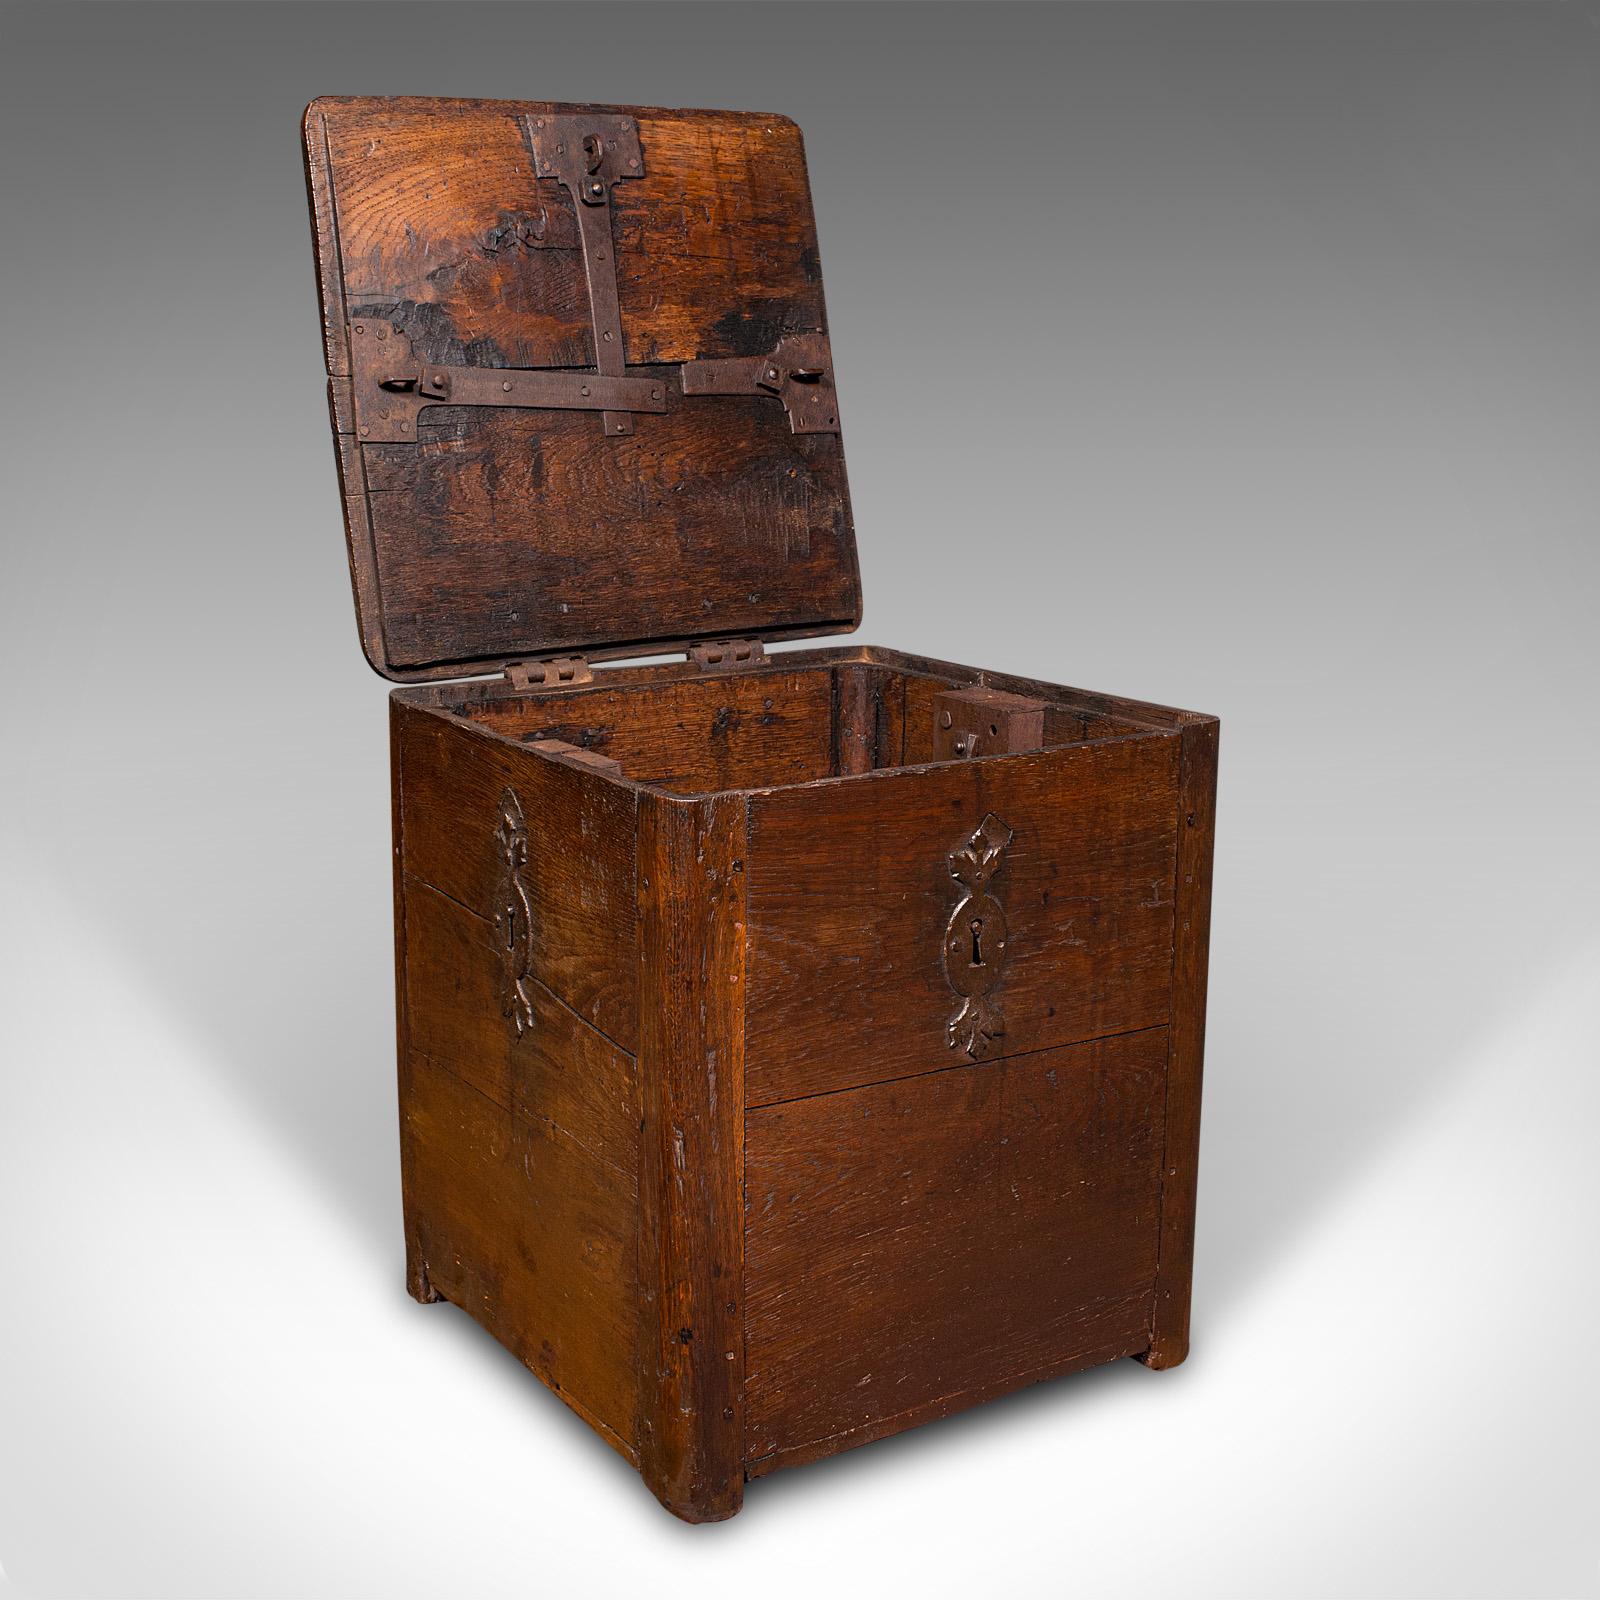 This is an antique mail carriage strong box. An English, oak security chest, dating to the early Georgian period, circa 1720.

Fascinating George I lock box from the time of the highwayman
Displays a desirable aged patina throughout
Wonderfully aged